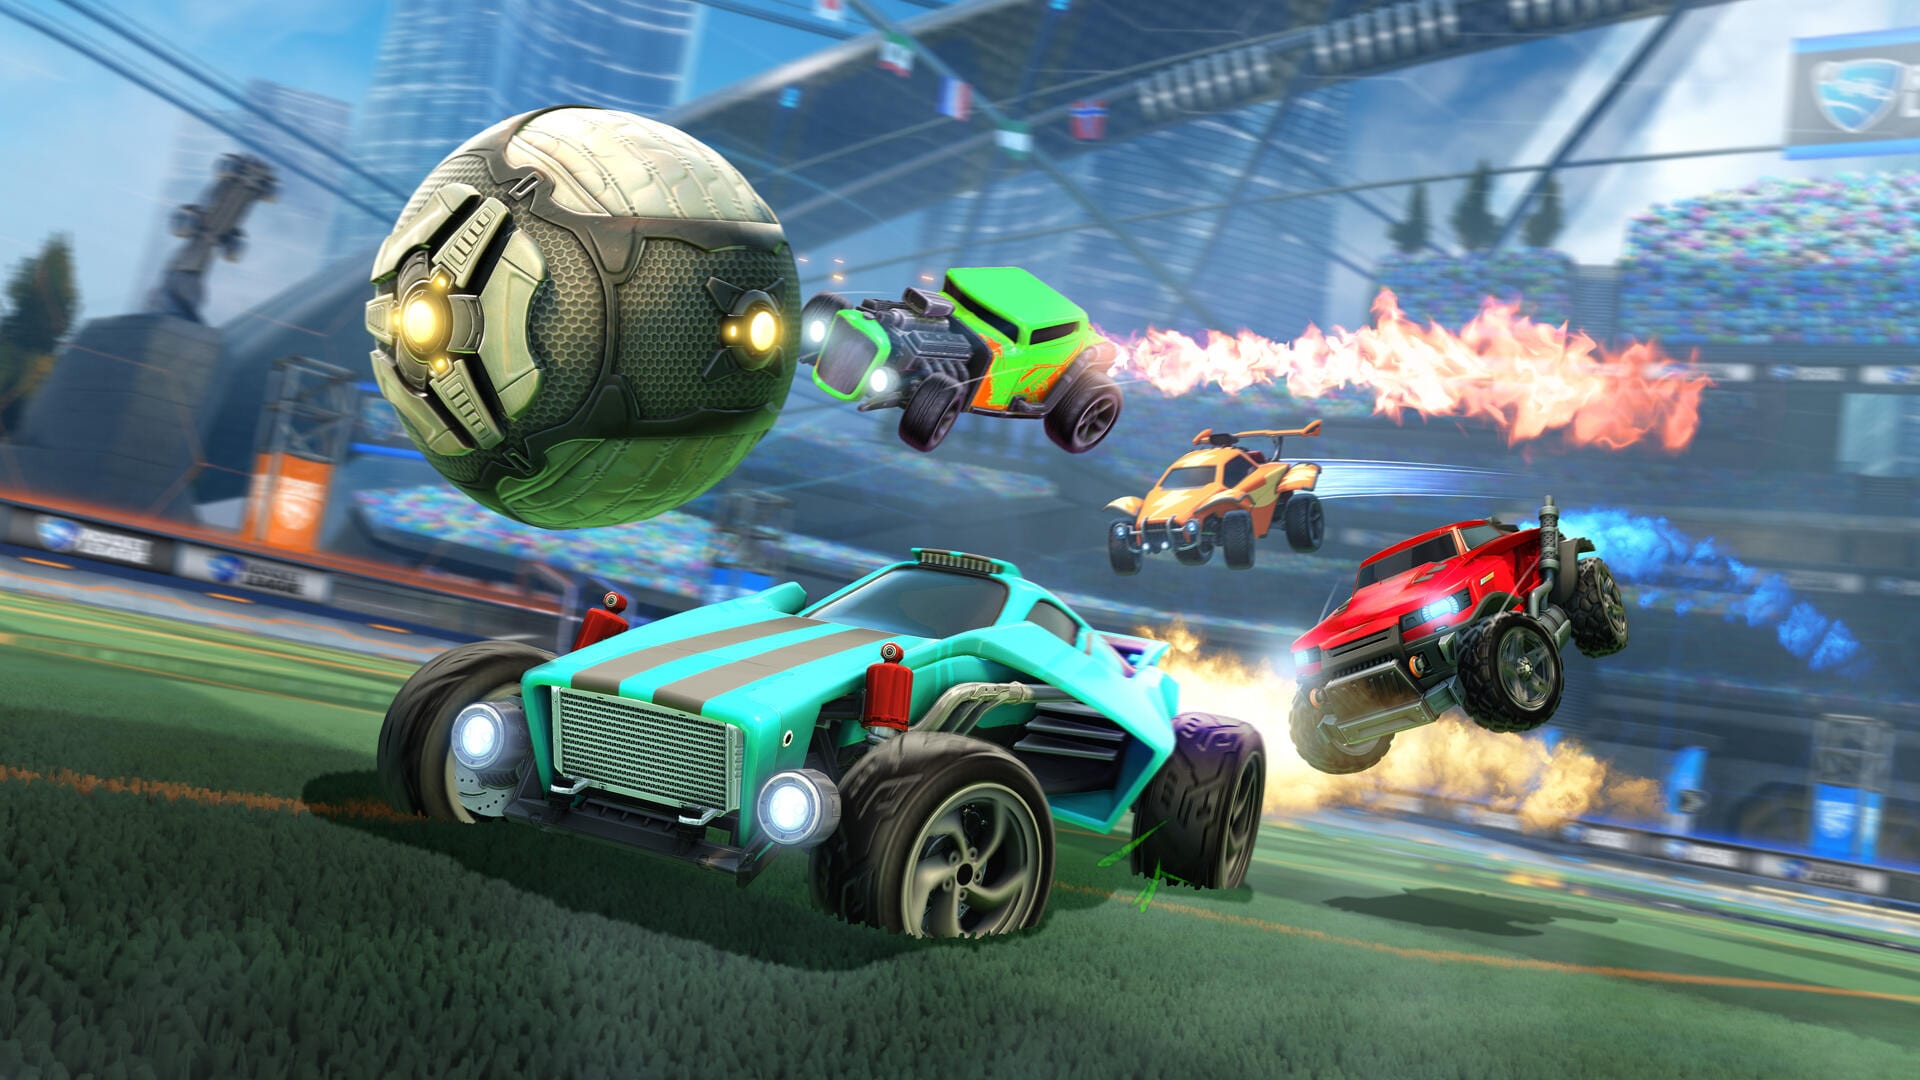 Rocket league free to play epic games ps4